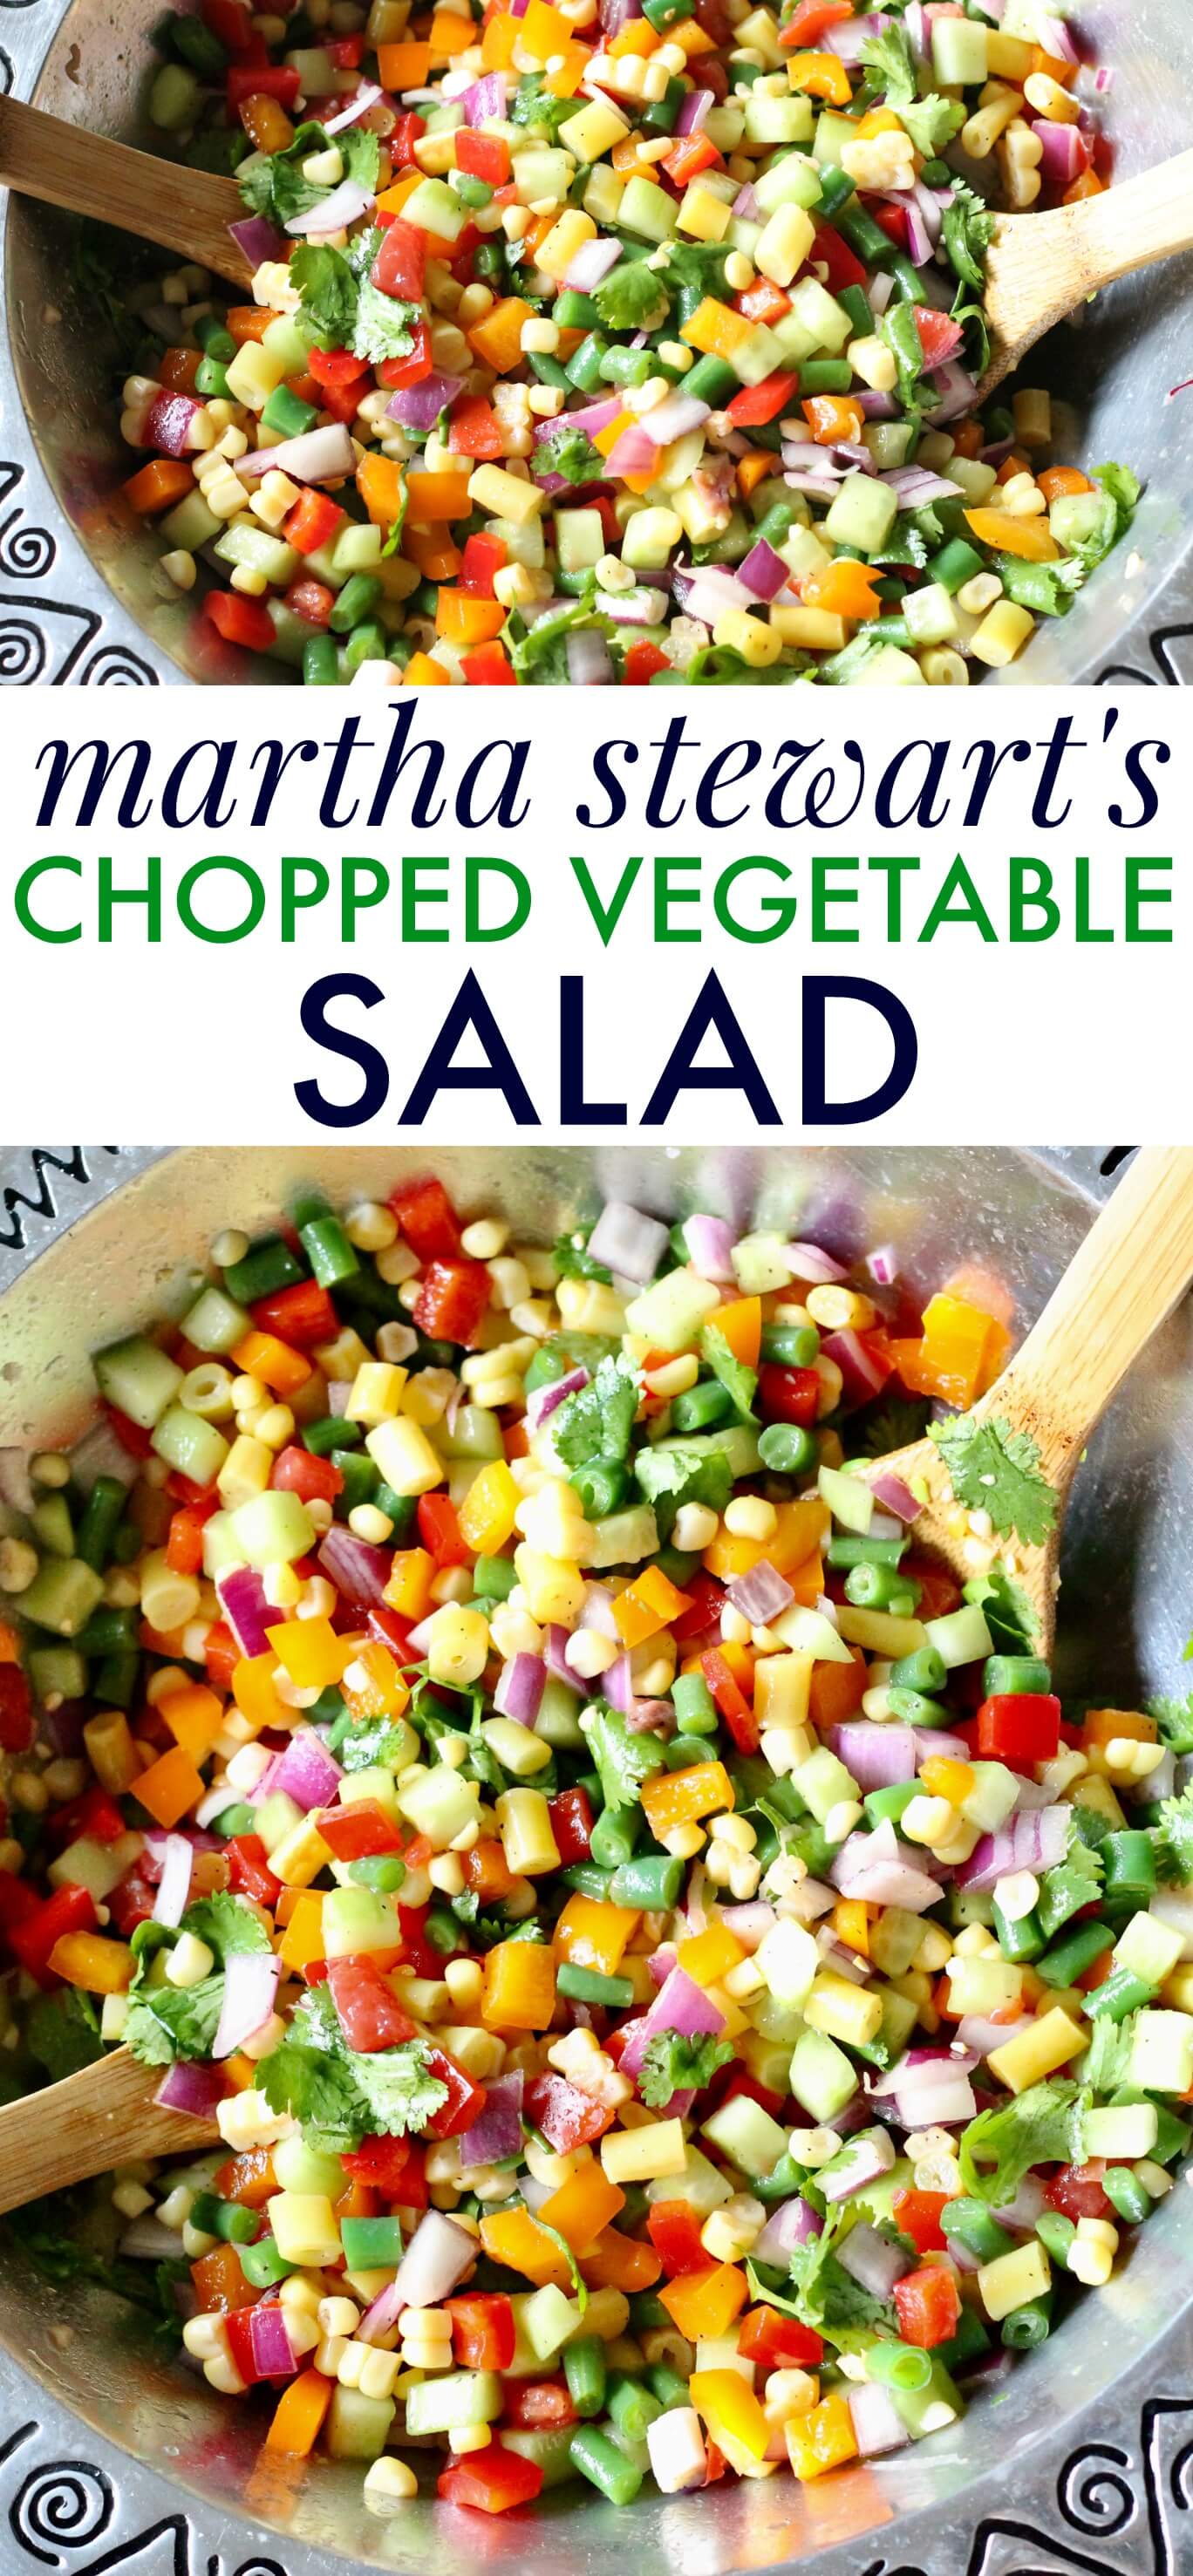 Martha Stewart's Chopped Vegetable Salad Recipe. The best mix of fresh veggies. Perfect for spring and summer parties!